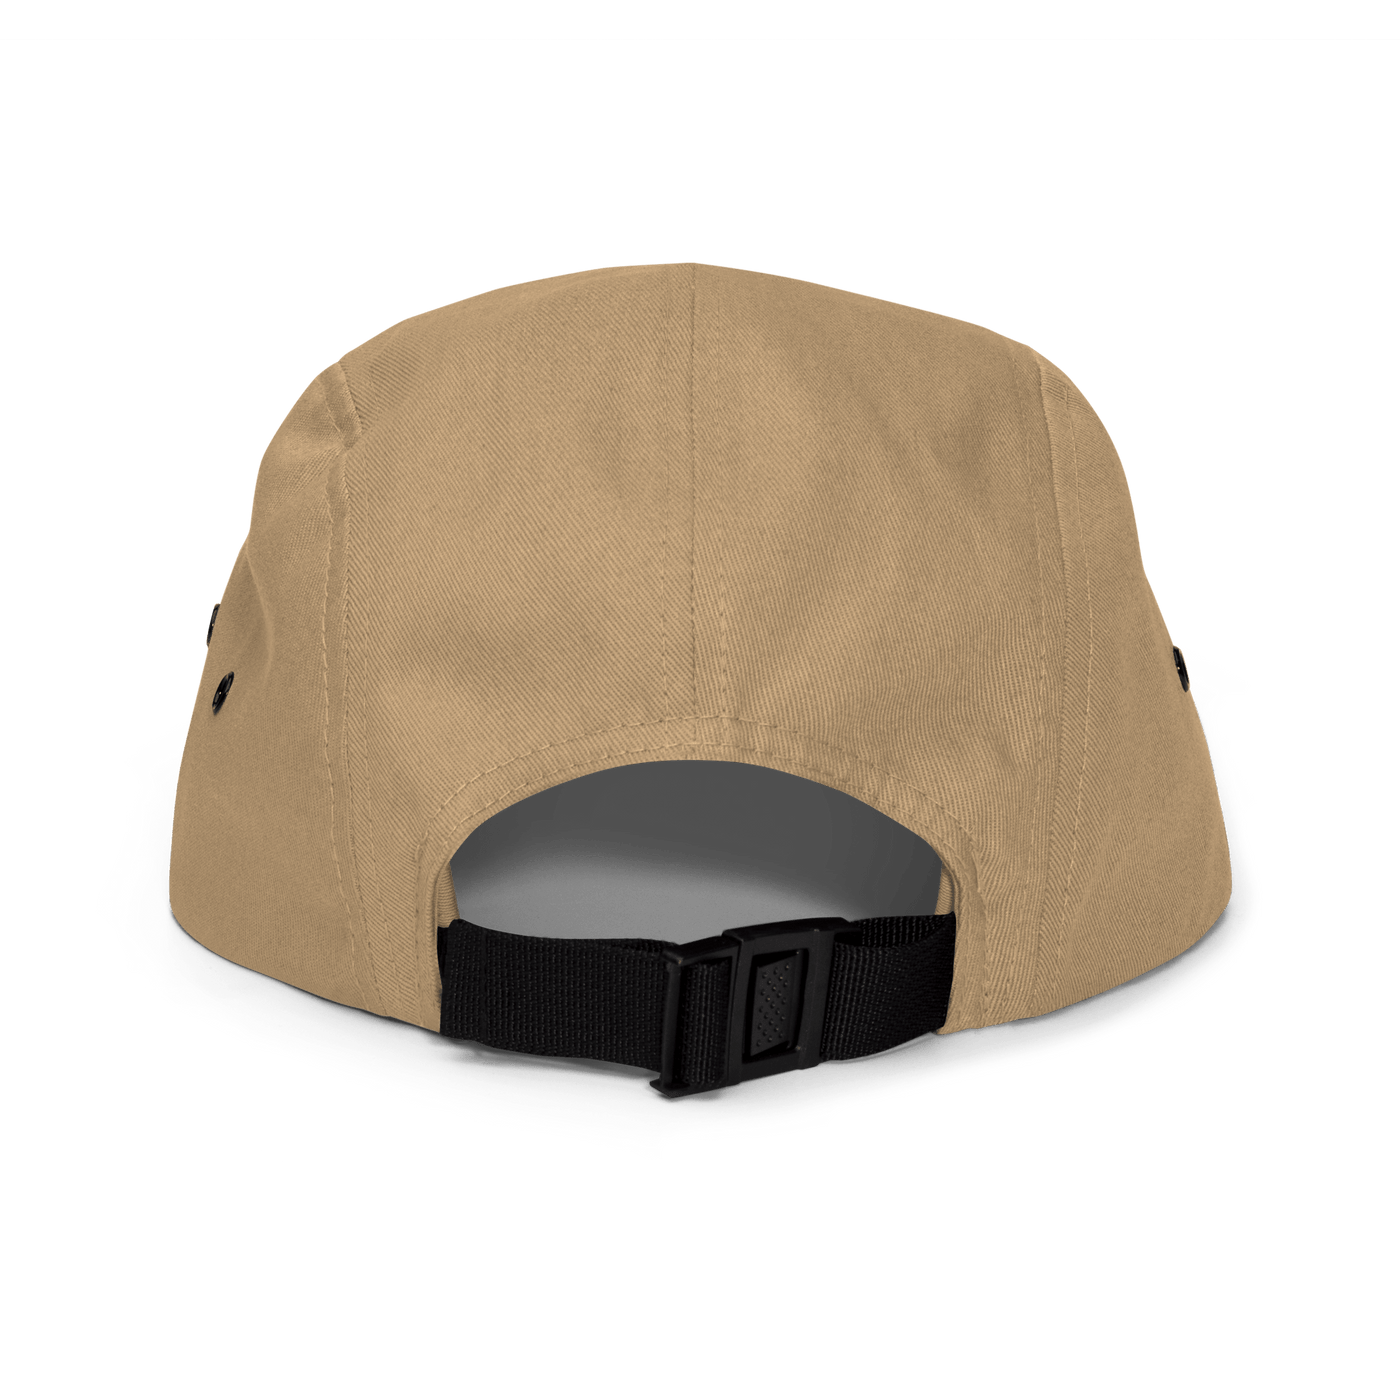 Always Late. Five Panel Cap - Khaki - - Just Another Cap Store